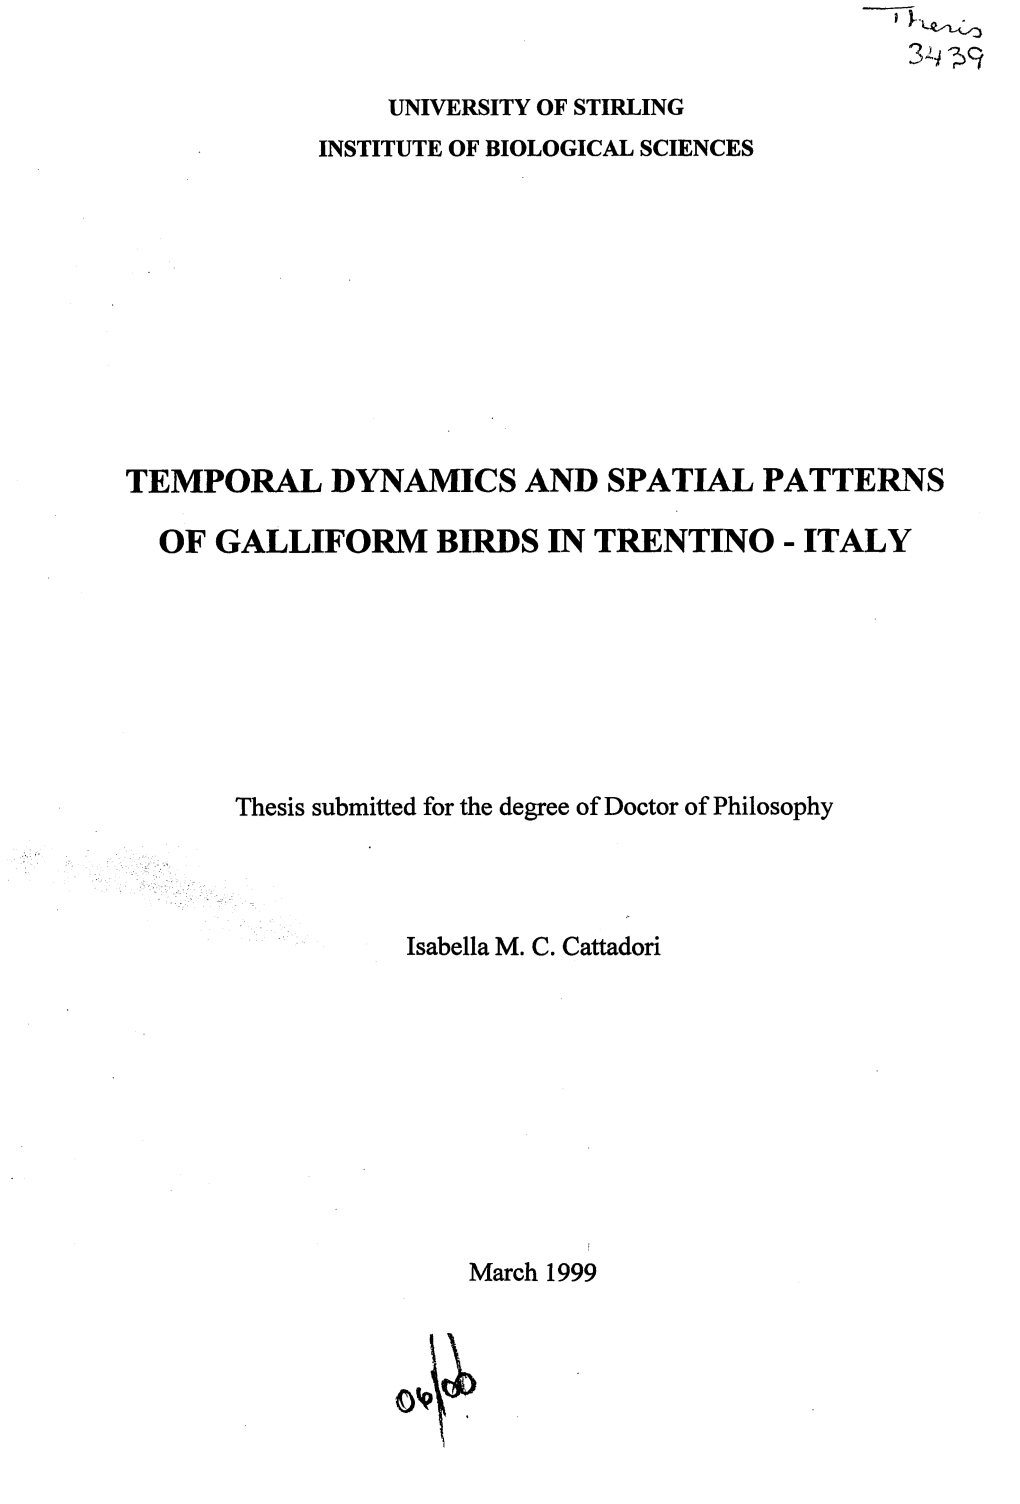 Temporal Dynamics and Spatial Patterns of Galliform Birds in Trentino - Italy